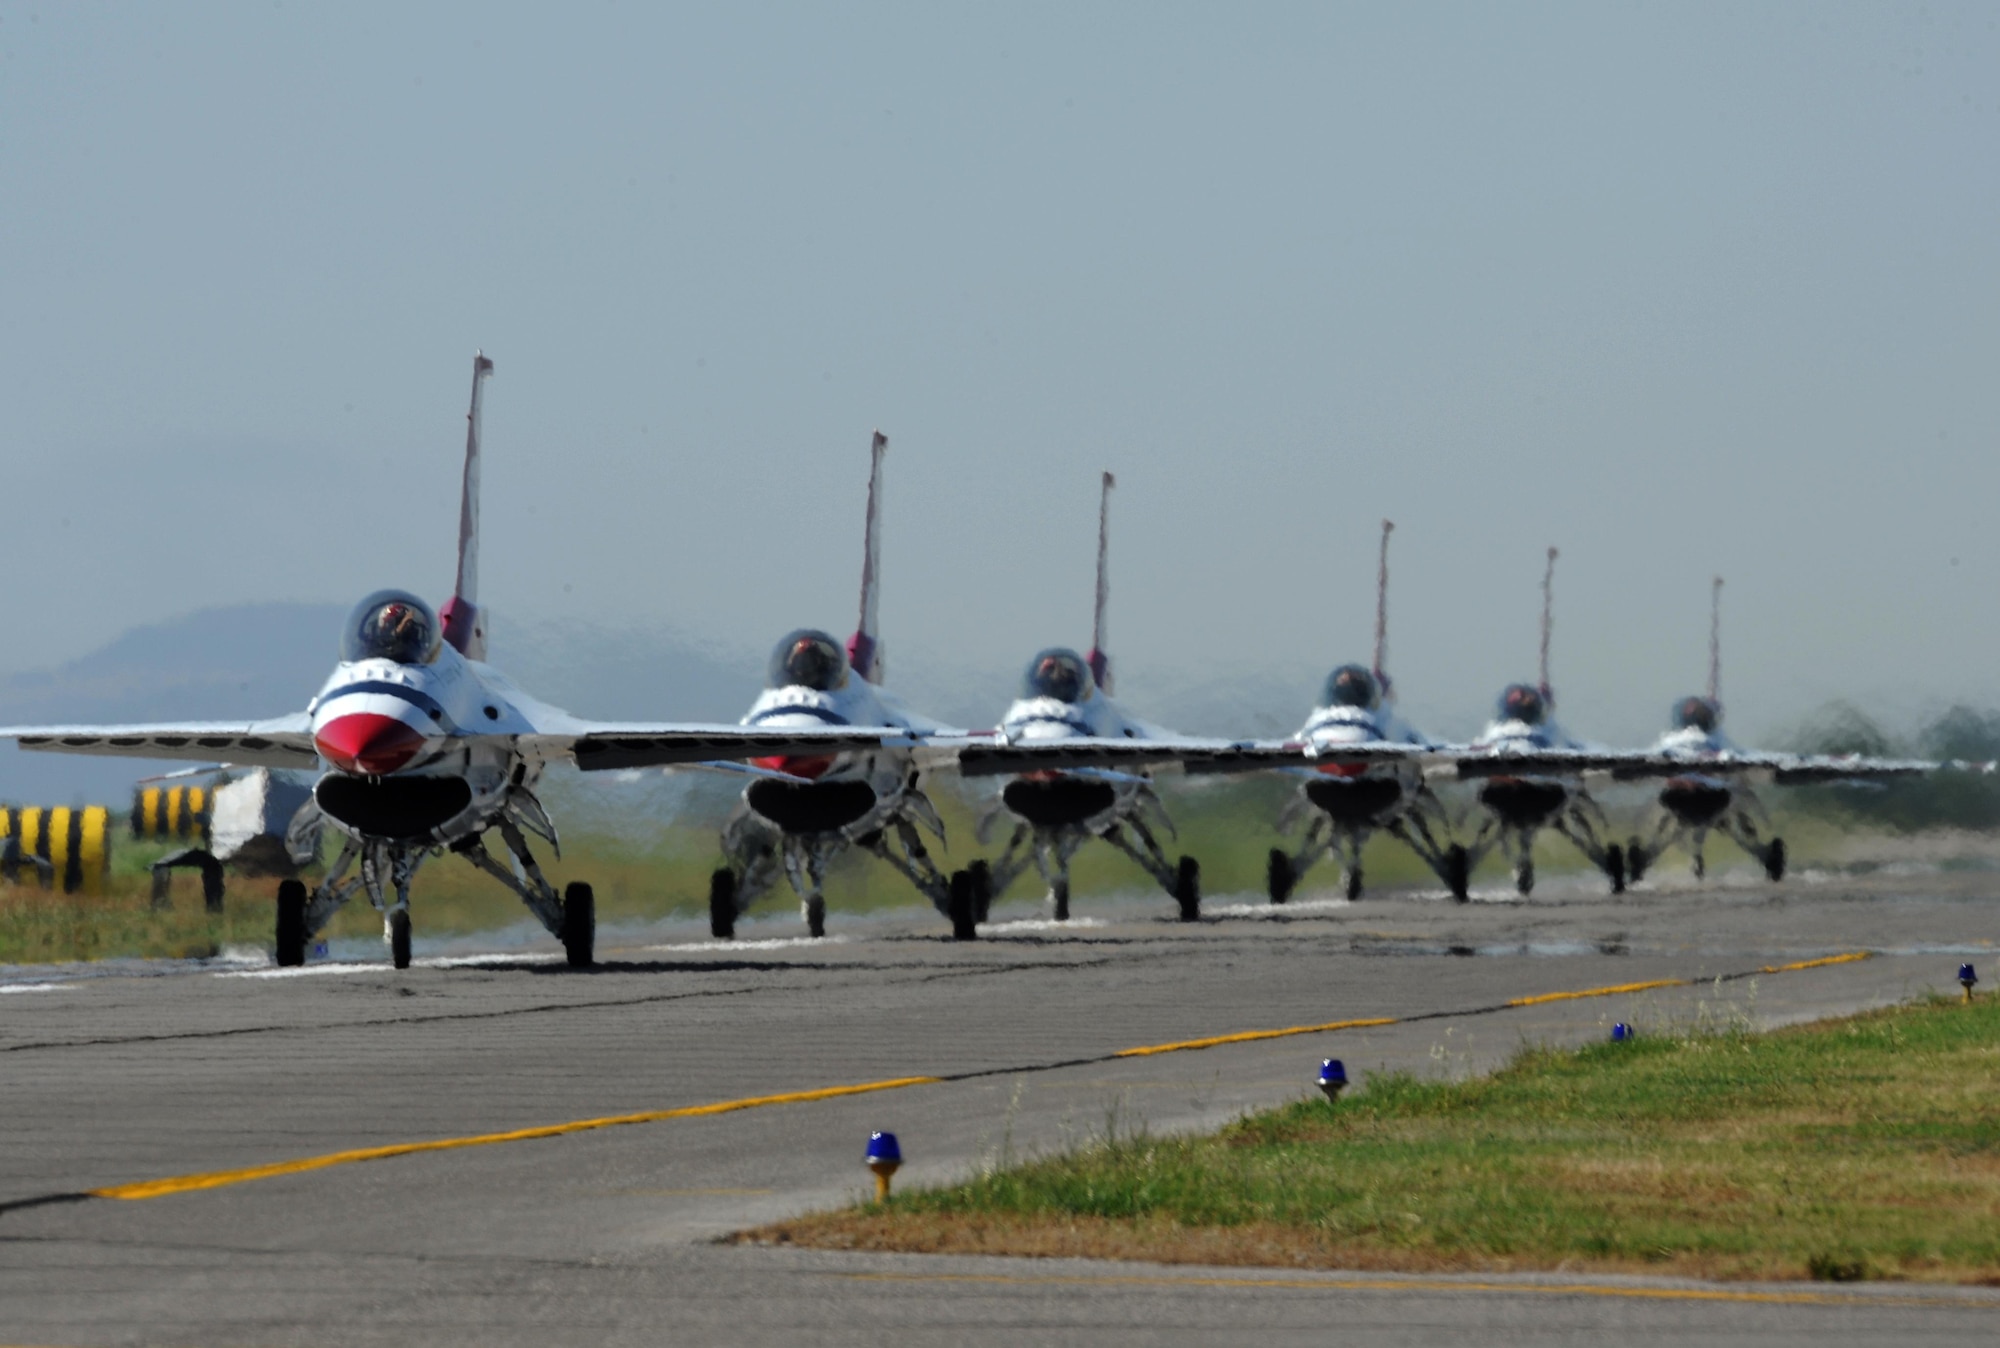 The United States Air Force Air Demonstration Squadron "Thunderbirds," taxi down the runway after their performance during Air Show Turkiye 2011 at Cigli Air Base, June 5, 2011. The Thunderbirds performed alongside other world-renowned aerial demonstration teams to honor 100 years of Turkish aviation. (U.S. Air Force photo by Staff Sgt. Larry E. Reid Jr.)